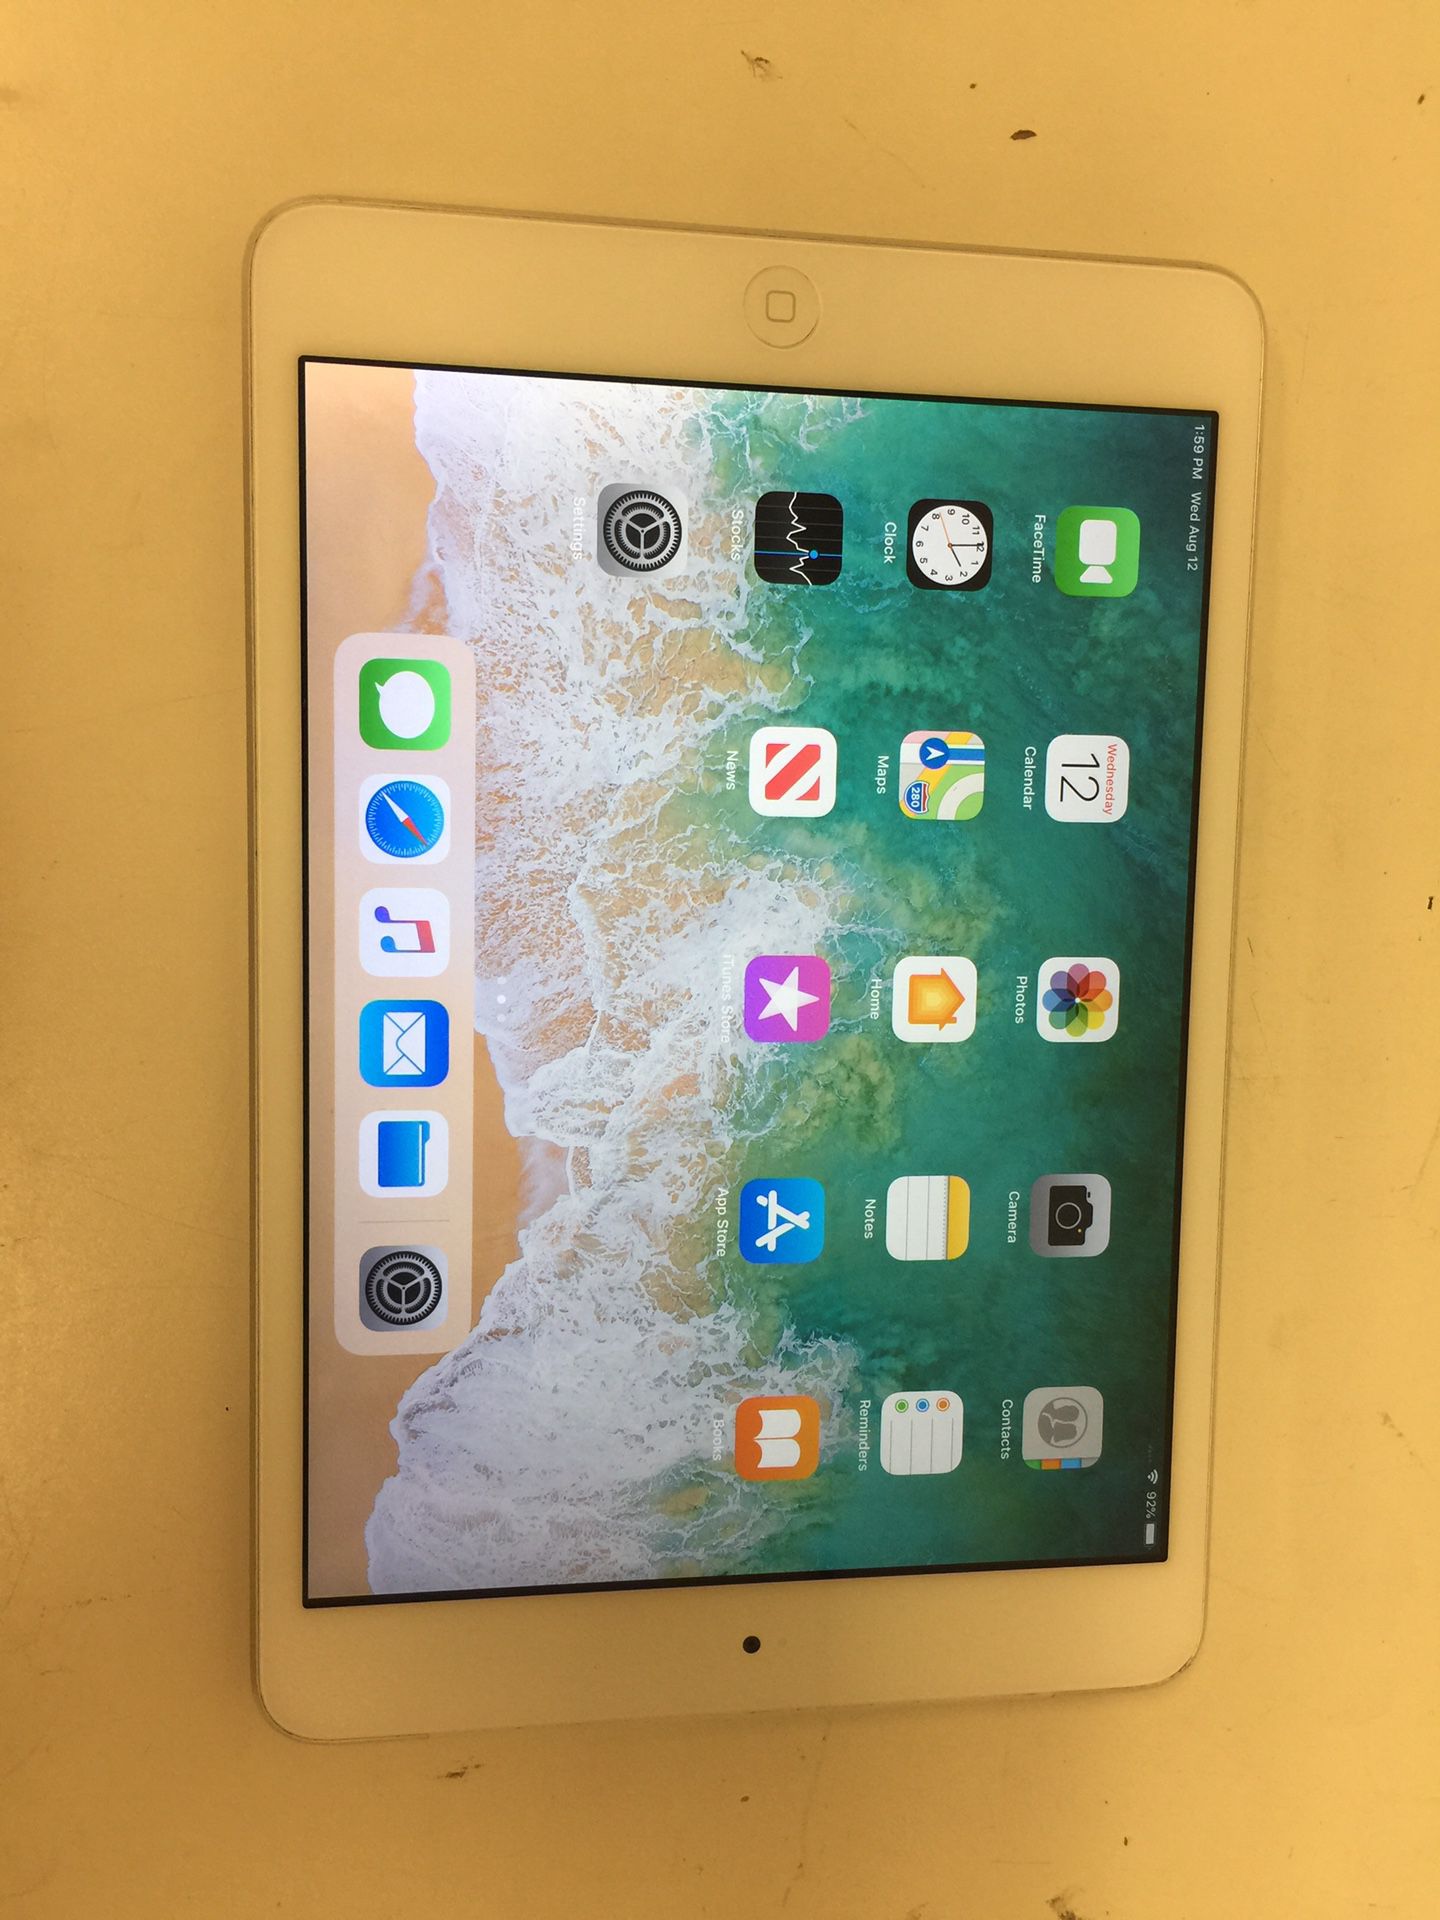 Apple ipad air 1st gen 16gb wifi & cellular sim unlock with charger